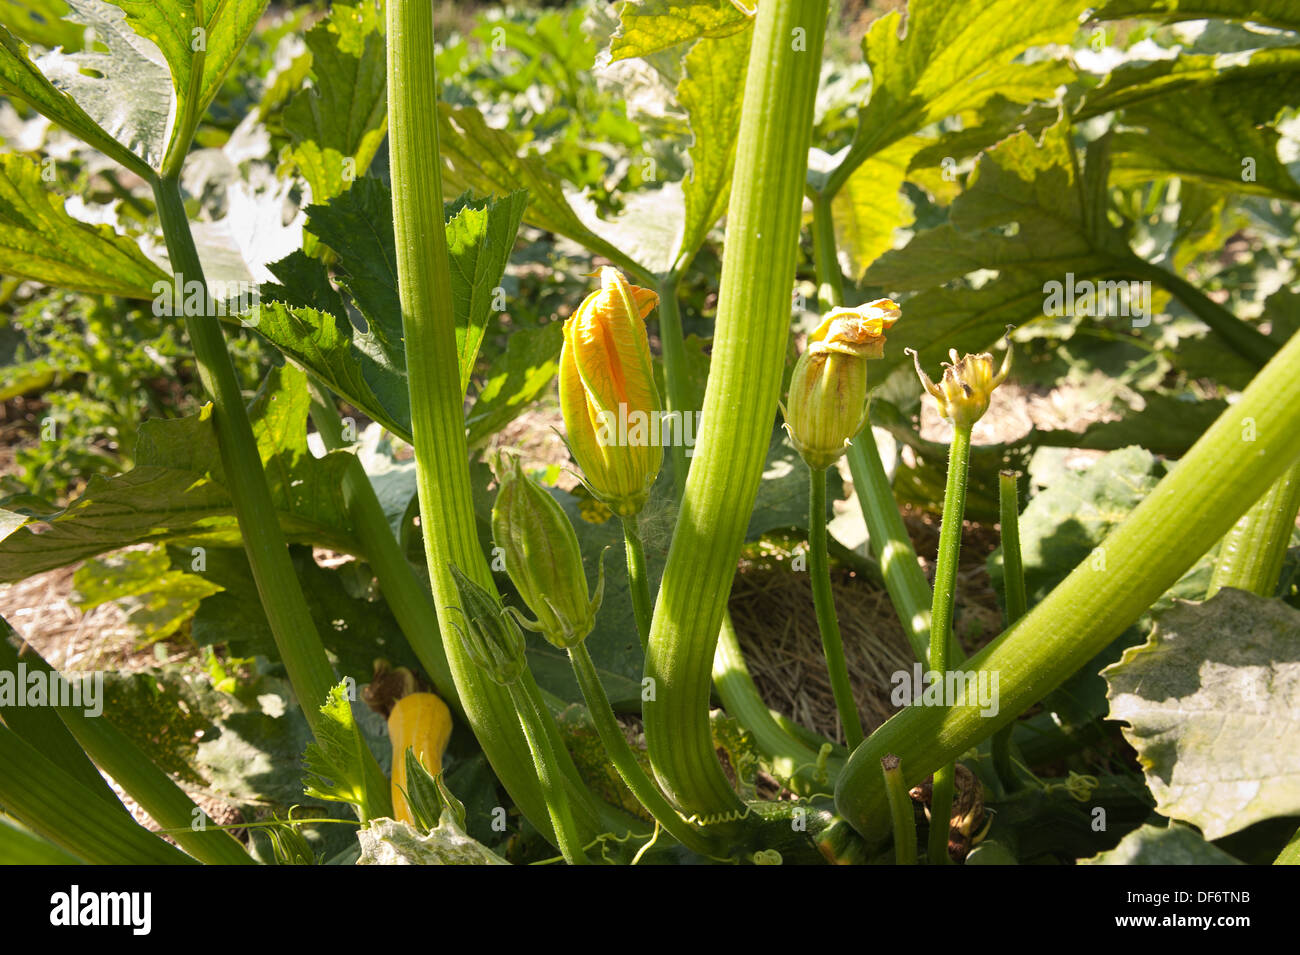 masses of marrow flowers on a single plant  ready for development and growth into mature vegetables Stock Photo